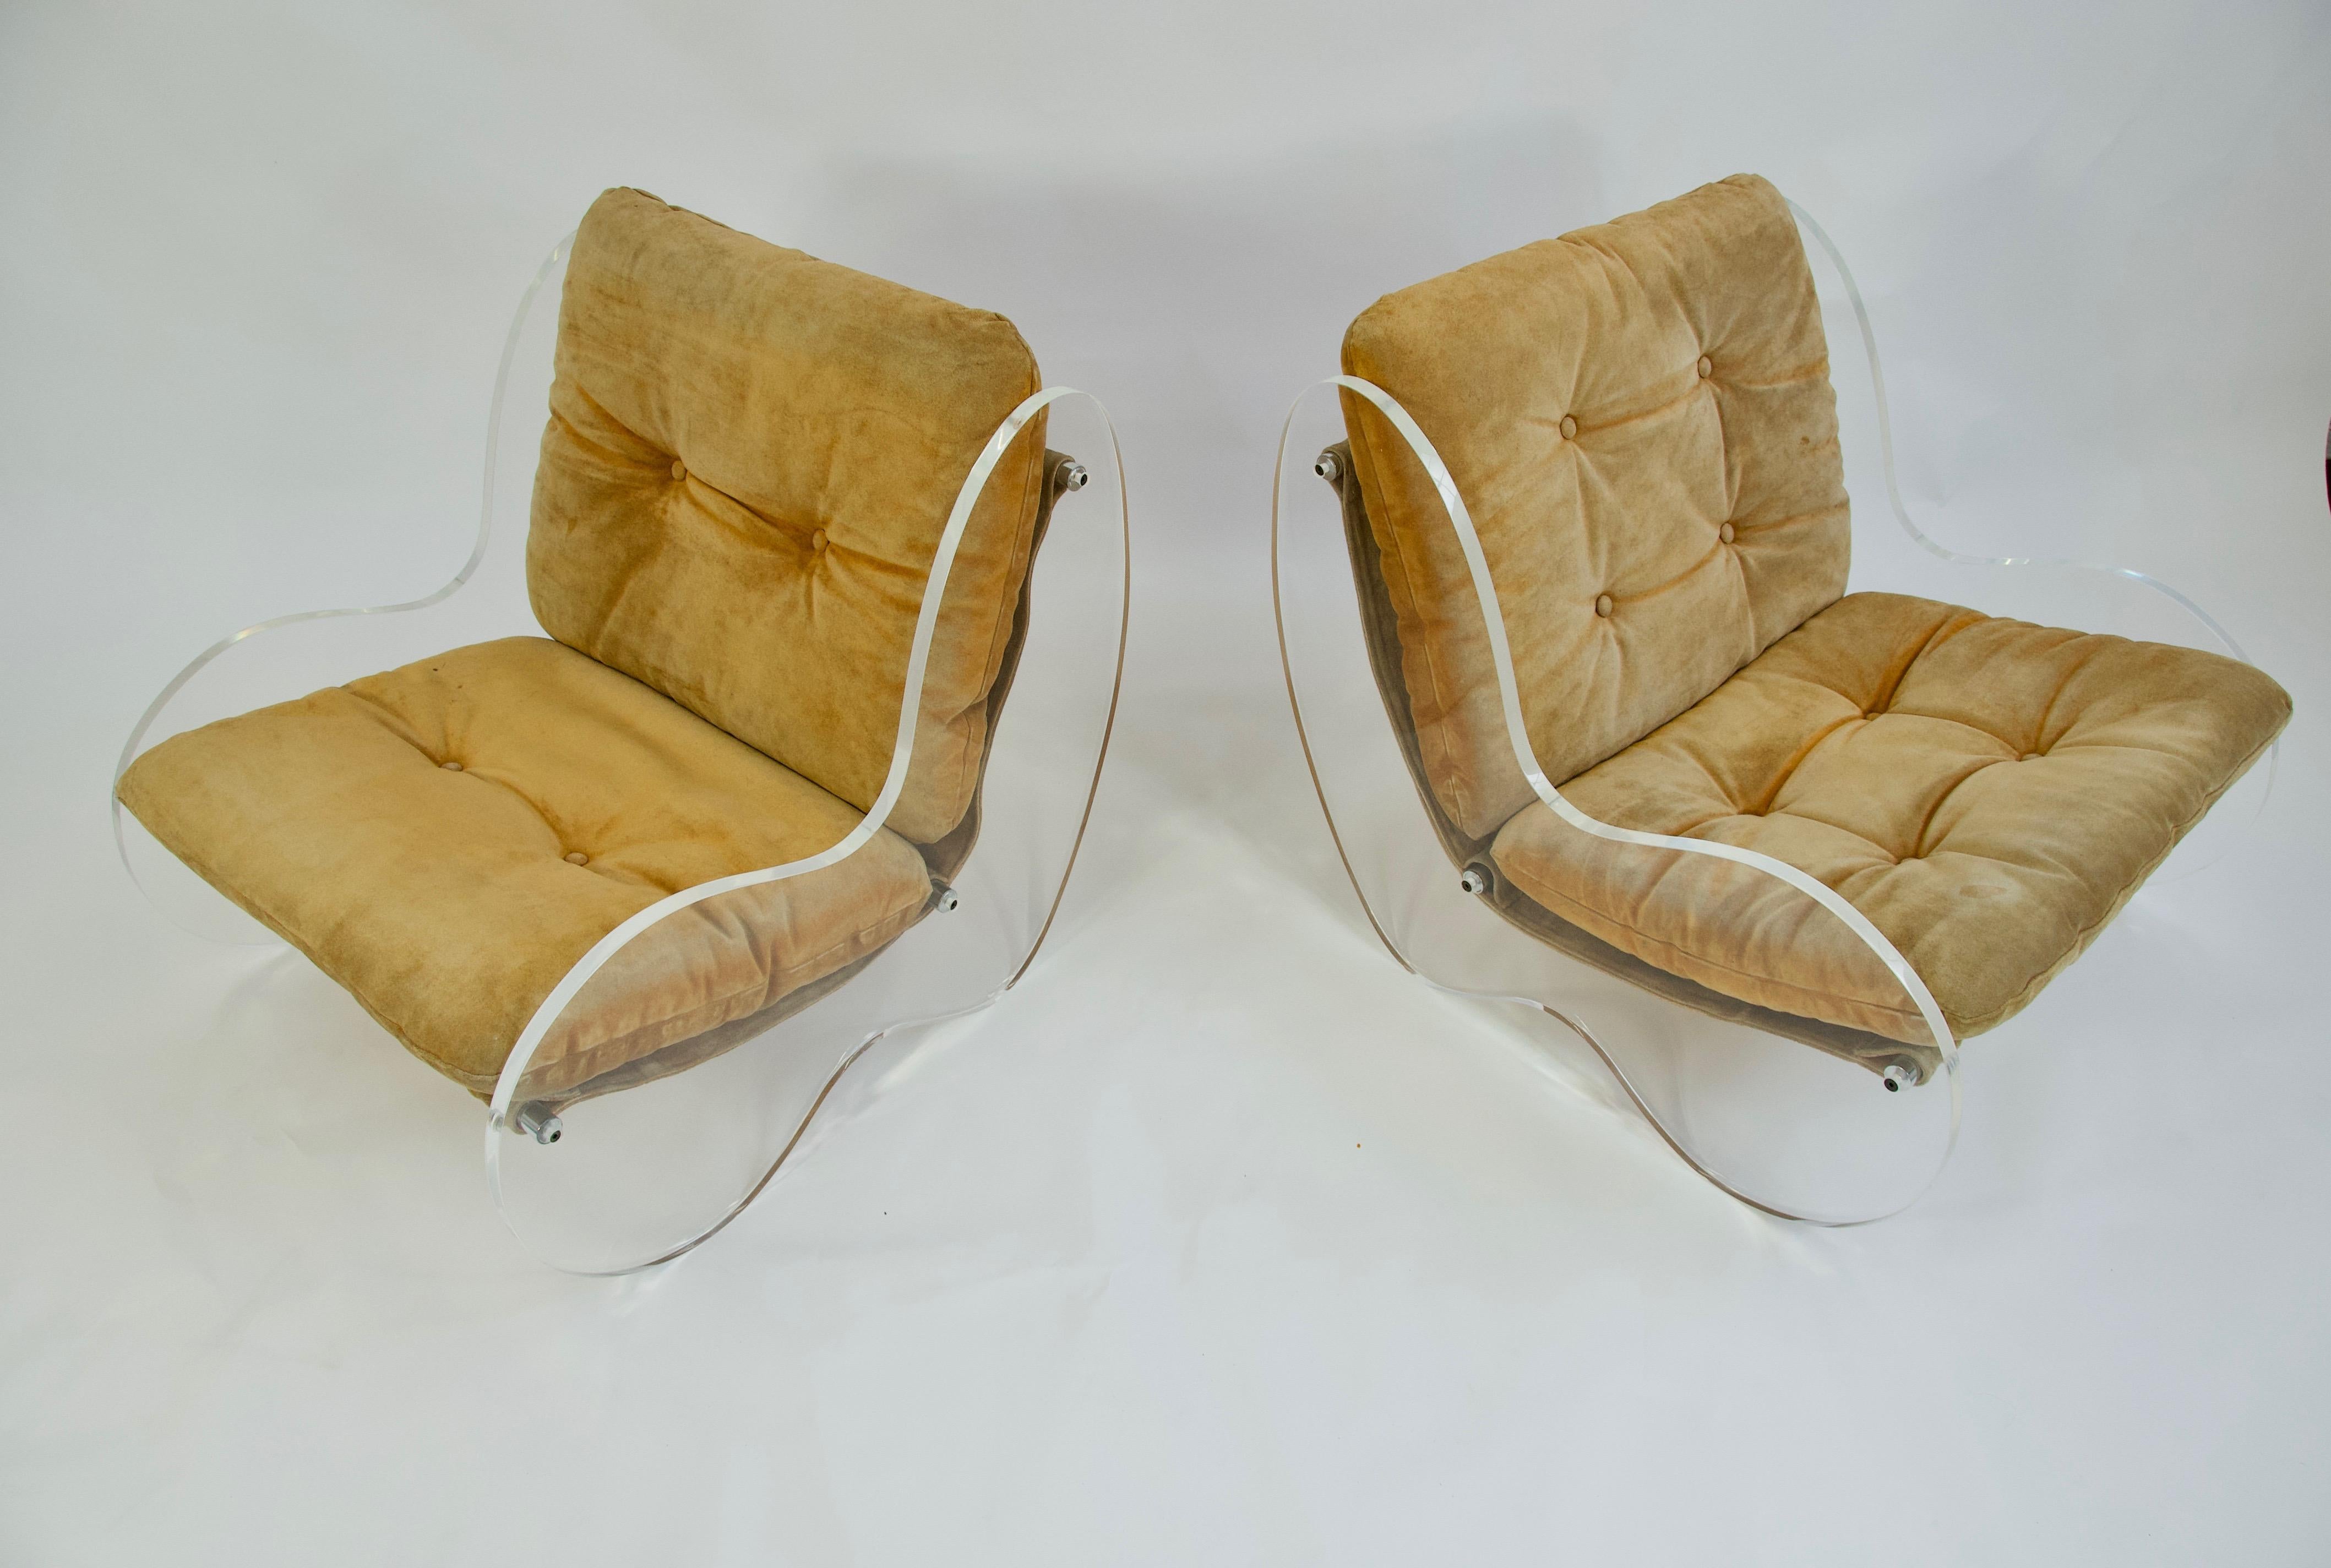 Polished Poul Norreklit Lucite Lounge Chairs